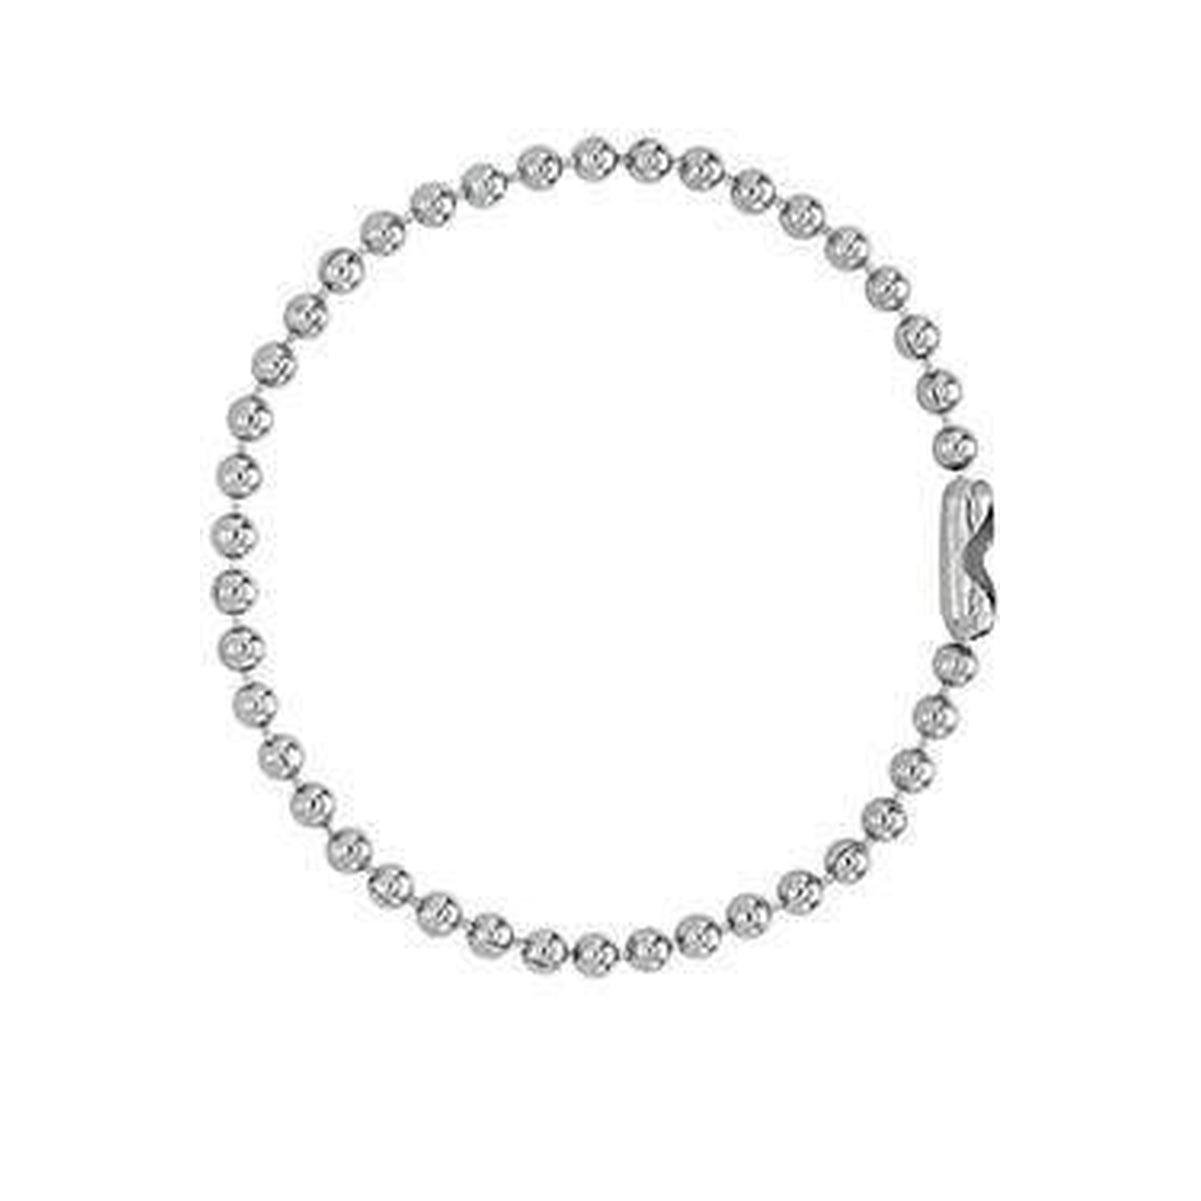 Nickel-Plated Steel Ball Chain, 5", No. 4 Bead Size 2450-1080 2450-1080